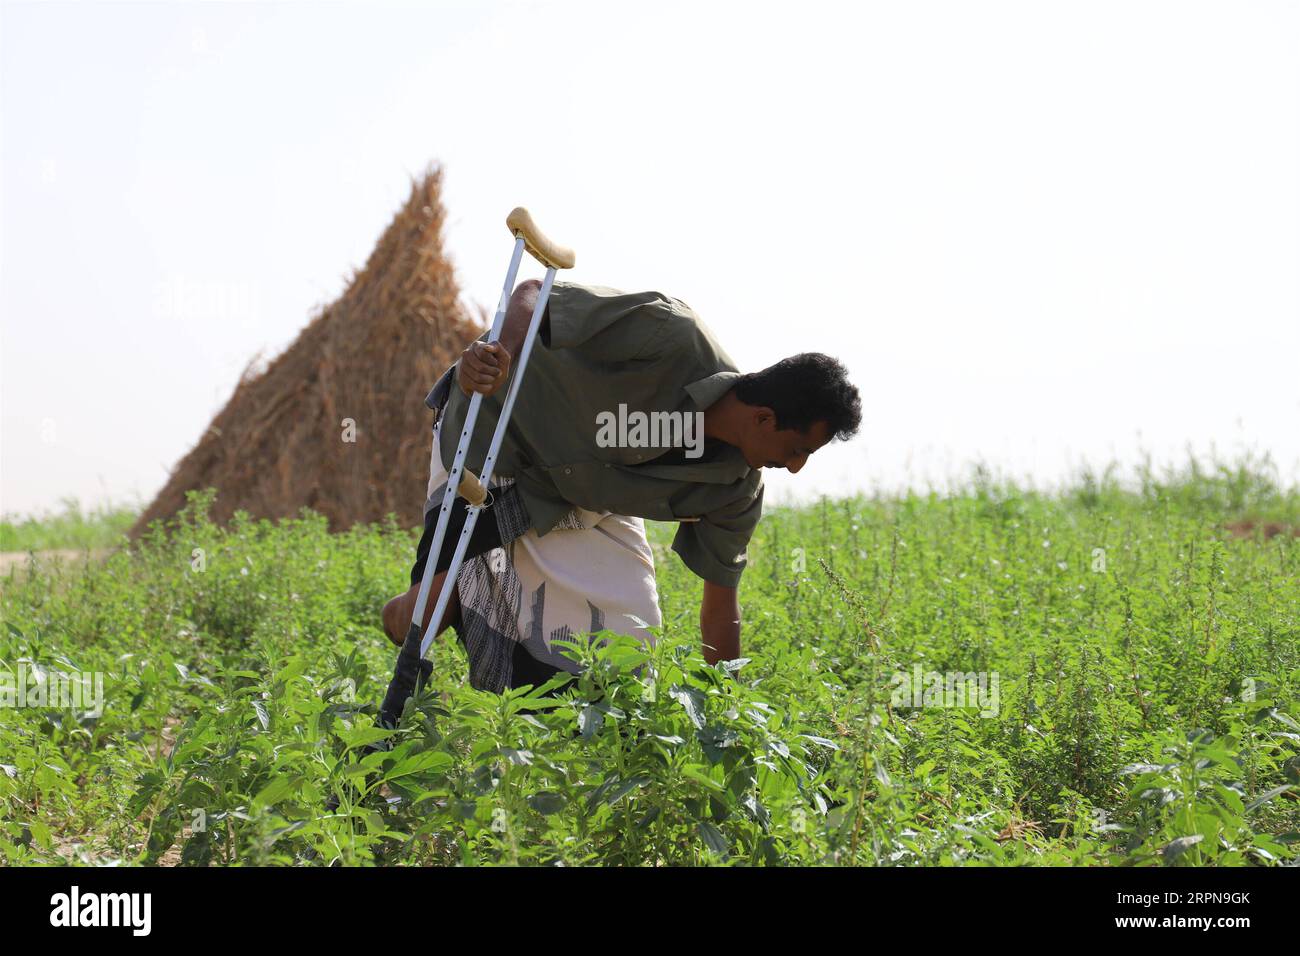 200225 -- HAJJAH, Feb. 25, 2020 Xinhua -- A landmine victim works at a farm in Midi District of Hajjah Province, Yemen, Feb. 24, 2020. According to the United Nations, thousands of landmines, unexploded ordnance, and other explosive remnants of war have been left behind during the ongoing conflict in Yemen. Photo by Mohammed Alwafi/Xinhua YEMEN-HAJJAH-WAR-LANDMINE VICTIMS PUBLICATIONxNOTxINxCHN Stock Photo